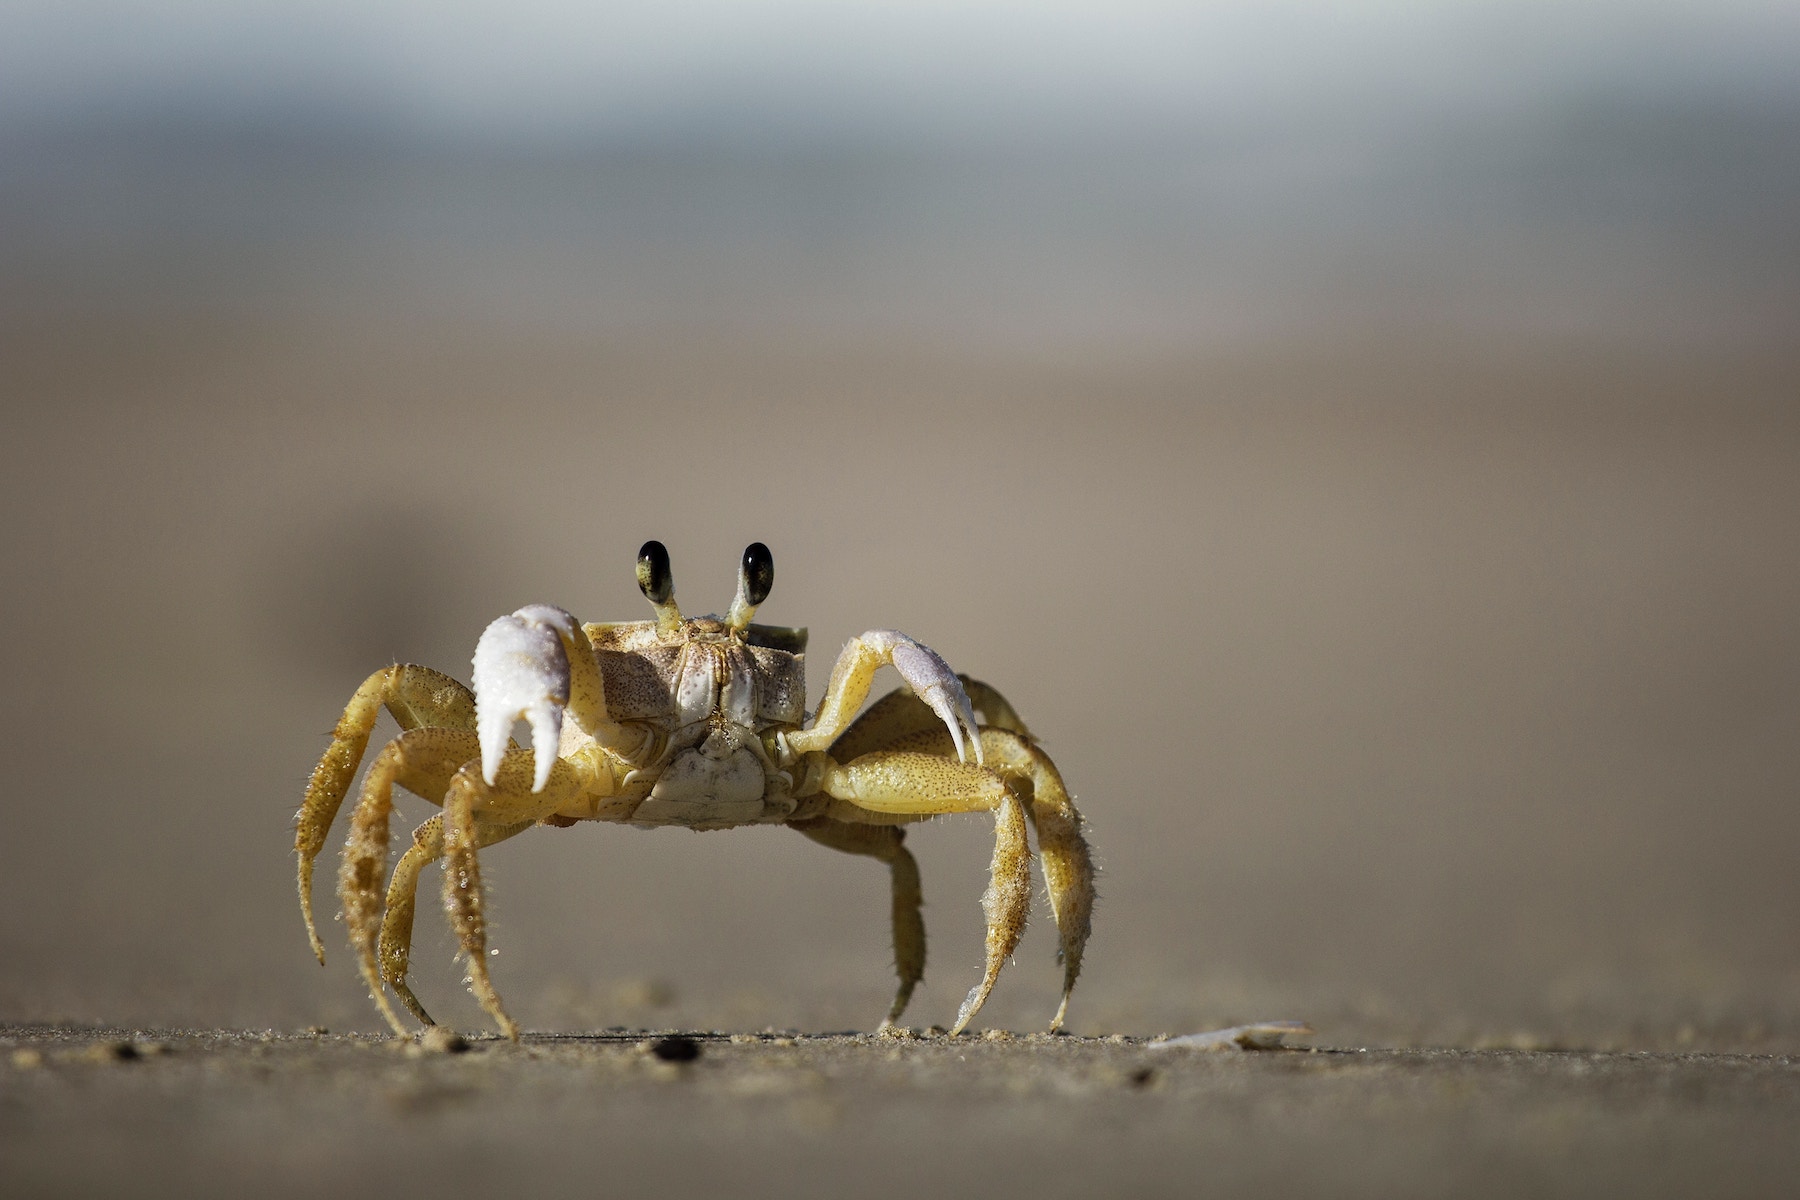 Are Crab Shells Going to Replace Plastic?